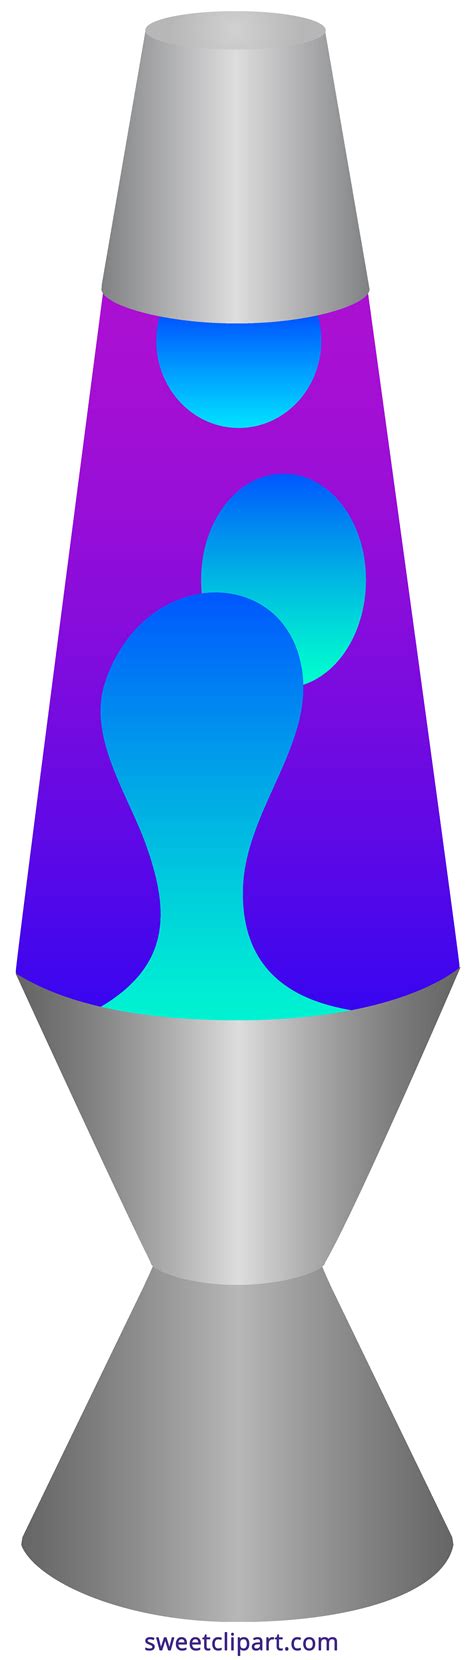 Lamp Clipart Lava Lamp Lamp Lava Lamp Transparent Free For Download On